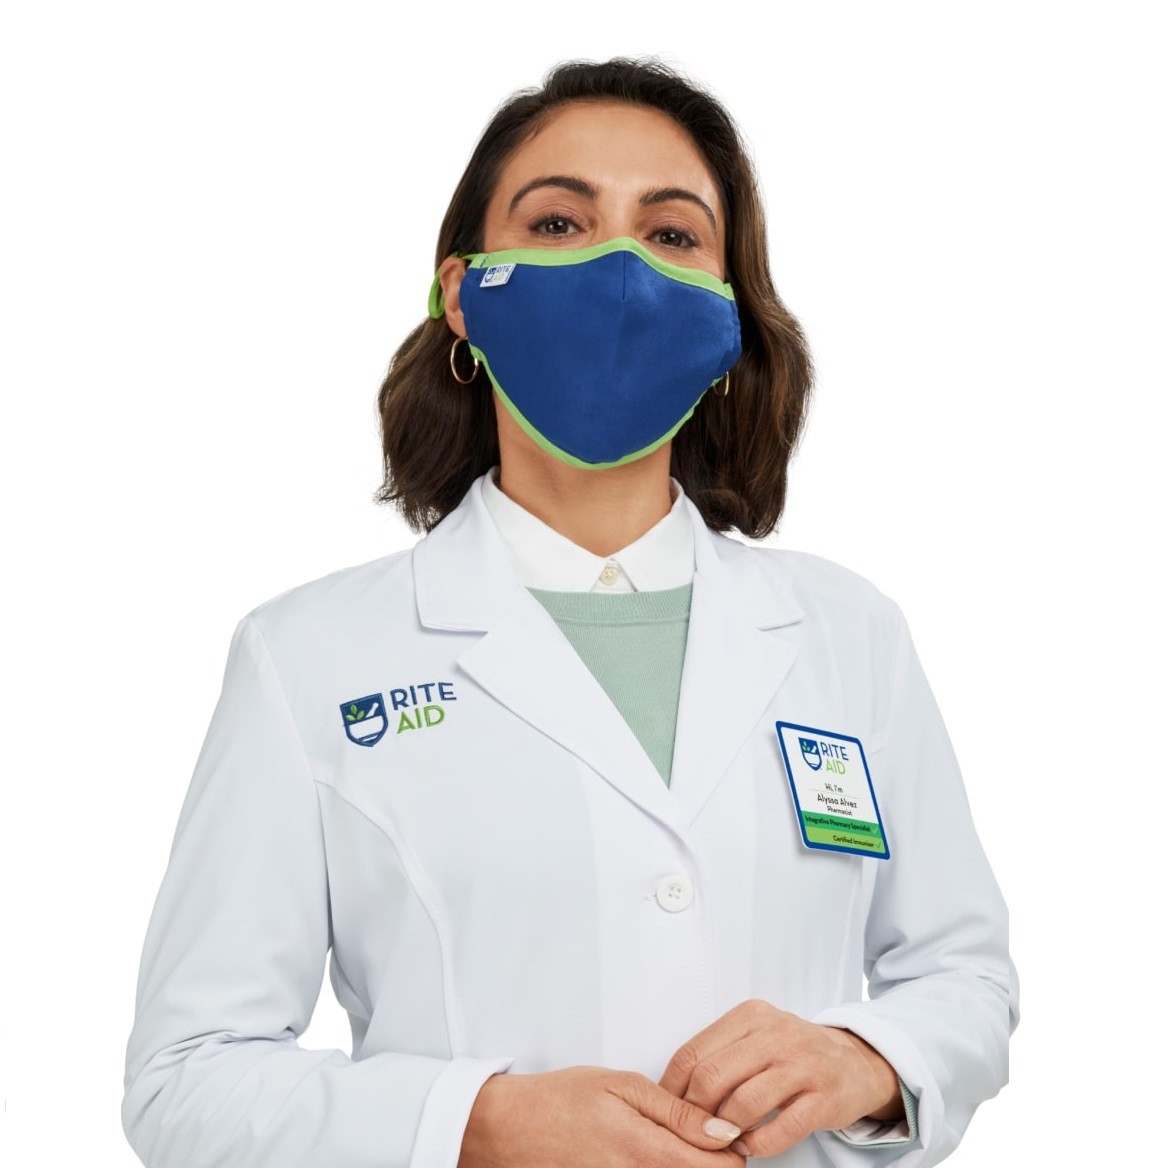 pharmacist-woman-with-mask-min